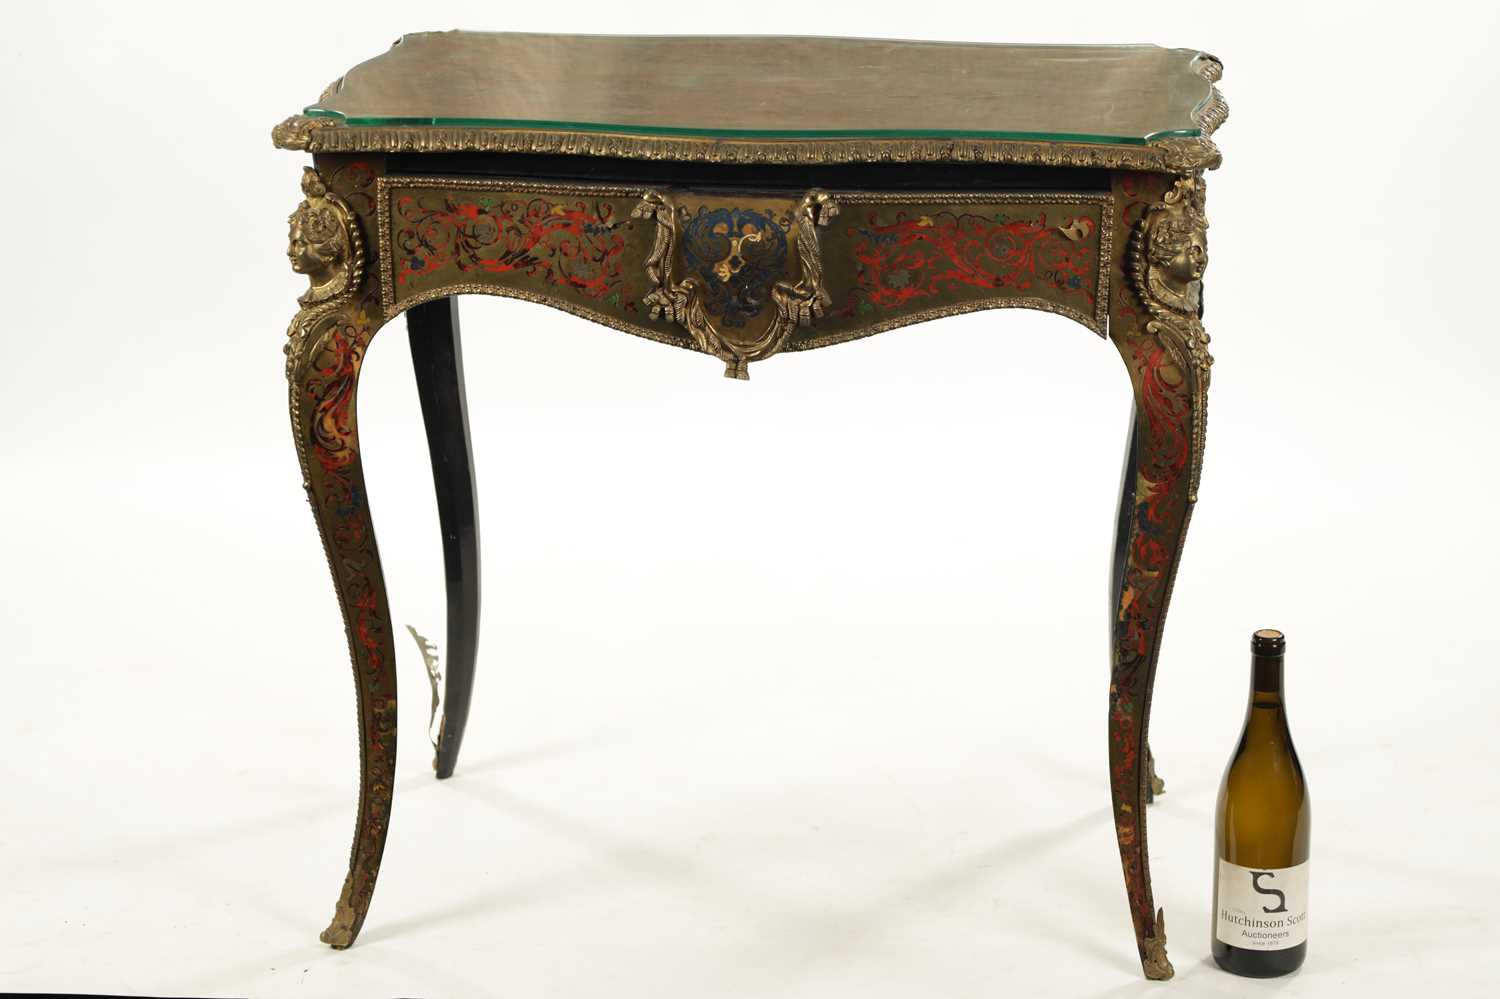 A 19TH CENTURY FRENCH TORTOISESHELL BOULLE SERPENTINE TABLE - Image 6 of 6